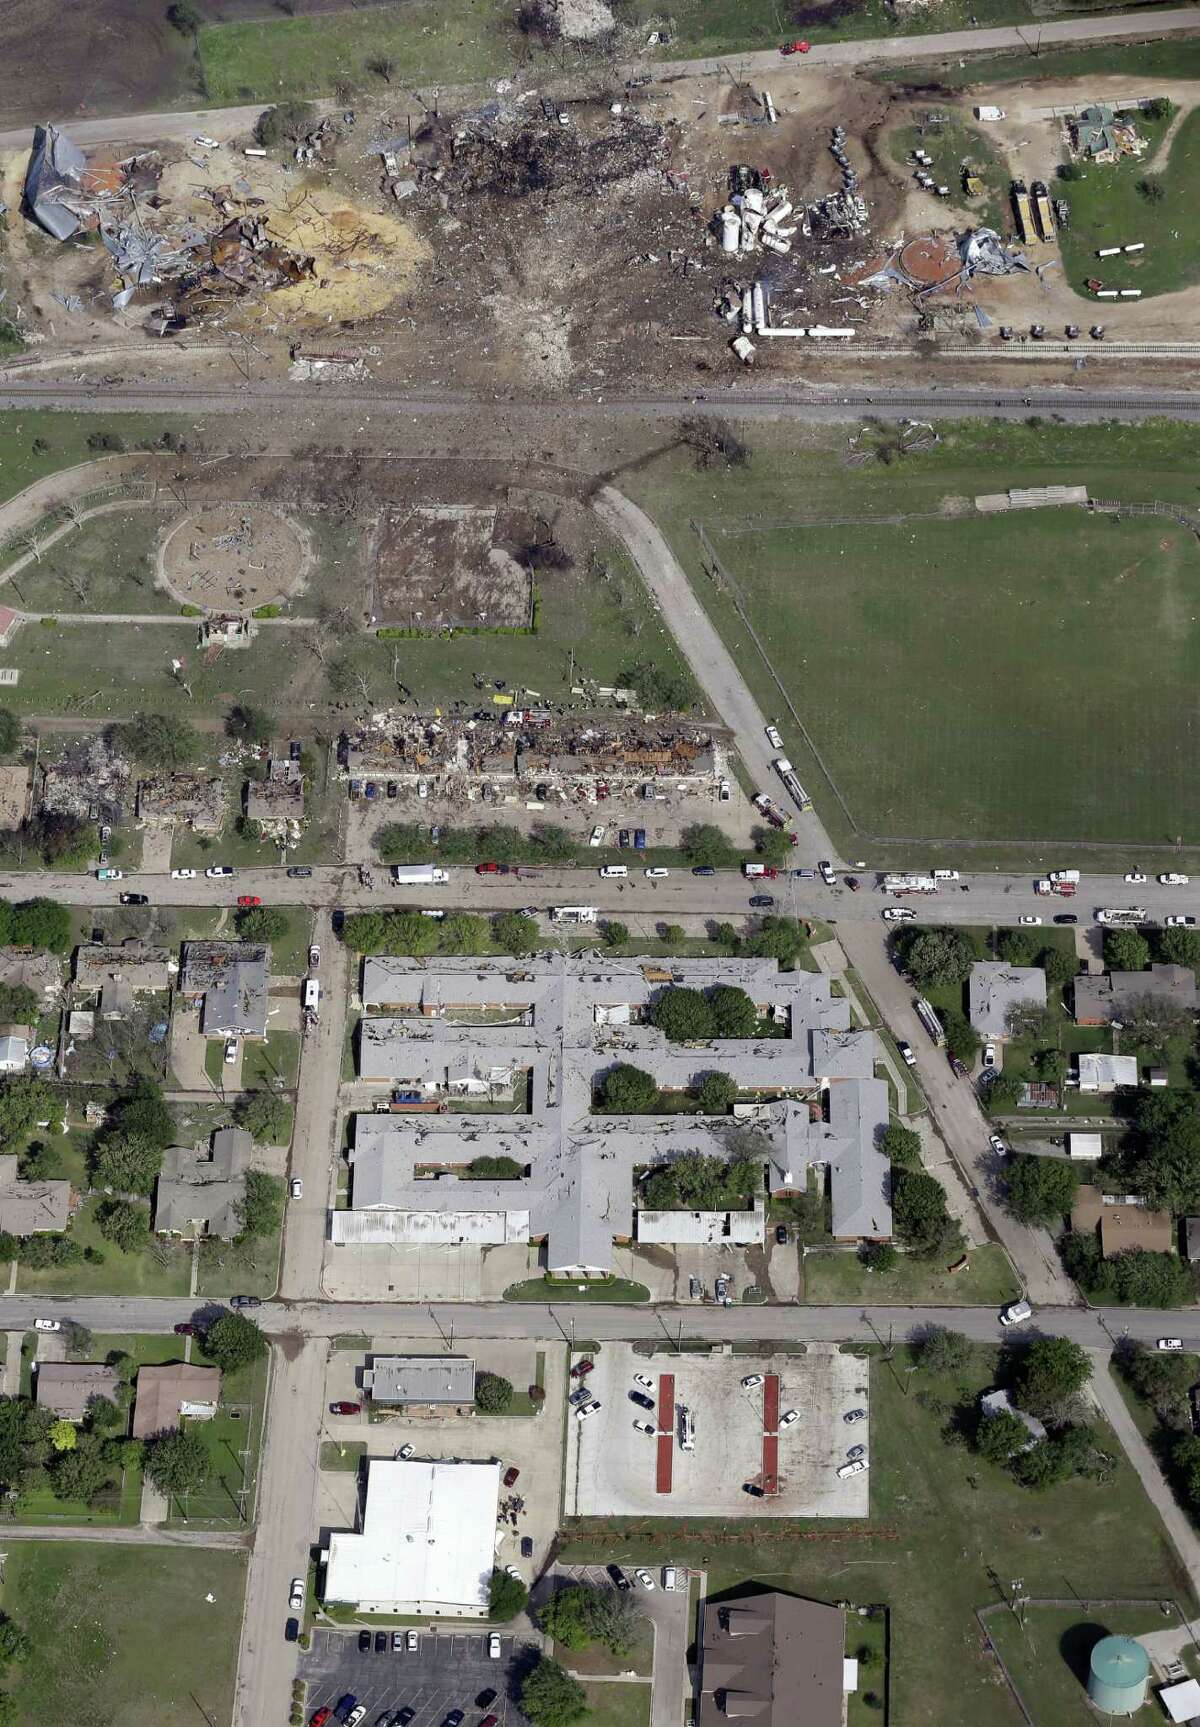 This April 18, 2013, aerial photo shows a destroyed West Fertilizer Co. plant, top, following an explosion in West, Texas. The Federal Emergency Management Agency is refusing to provide money to help rebuild West, the small Texas town where a deadly fertilizer plant explosion leveled numerous homes and a school, and killed 15 people. According to a letter obtained by The Associated Press, FEMA said it reviewed the state's appeal to help West but decided that the explosion "is not of the severity and magnitude that warrants a major disaster declaration." FEMA has, however, provided emergency funds to individual residents. (AP Photo/Tony Gutierrez)